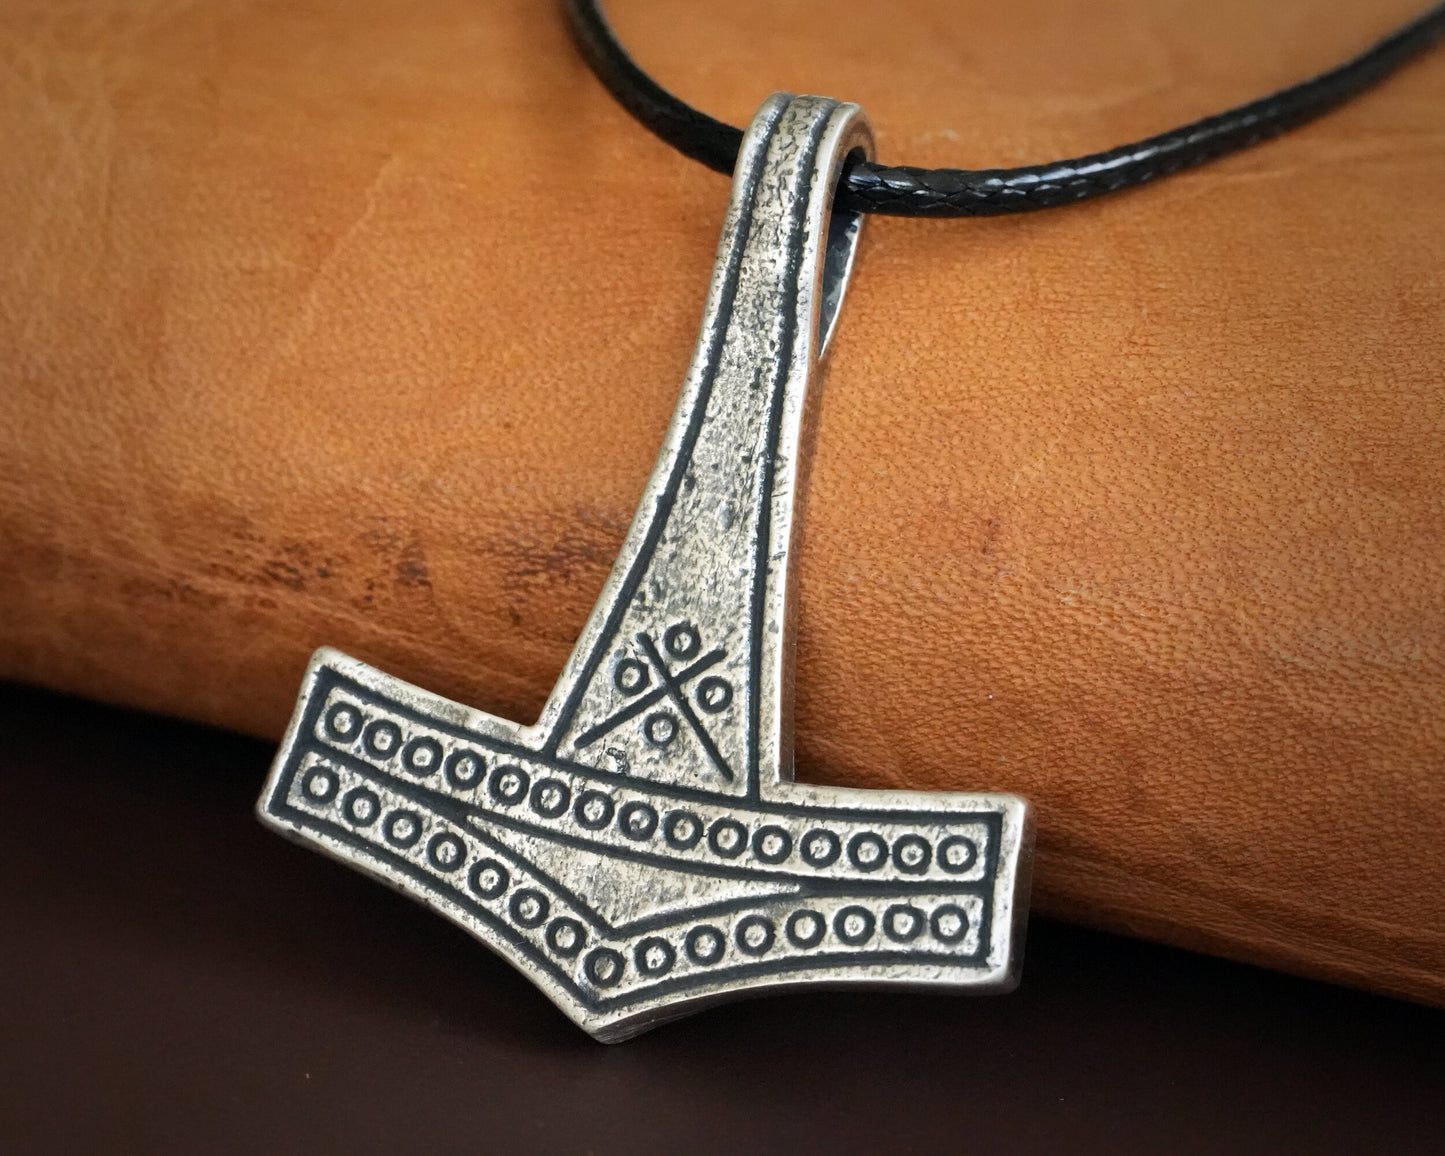 Romersdal Authentic Replica Thors Hammer Necklace Pendant Mjölnir Viking Norse Jewelry Thor Mjolnir Gifts for Men Brass  925 Sterling Silver - Baldur Jewelry